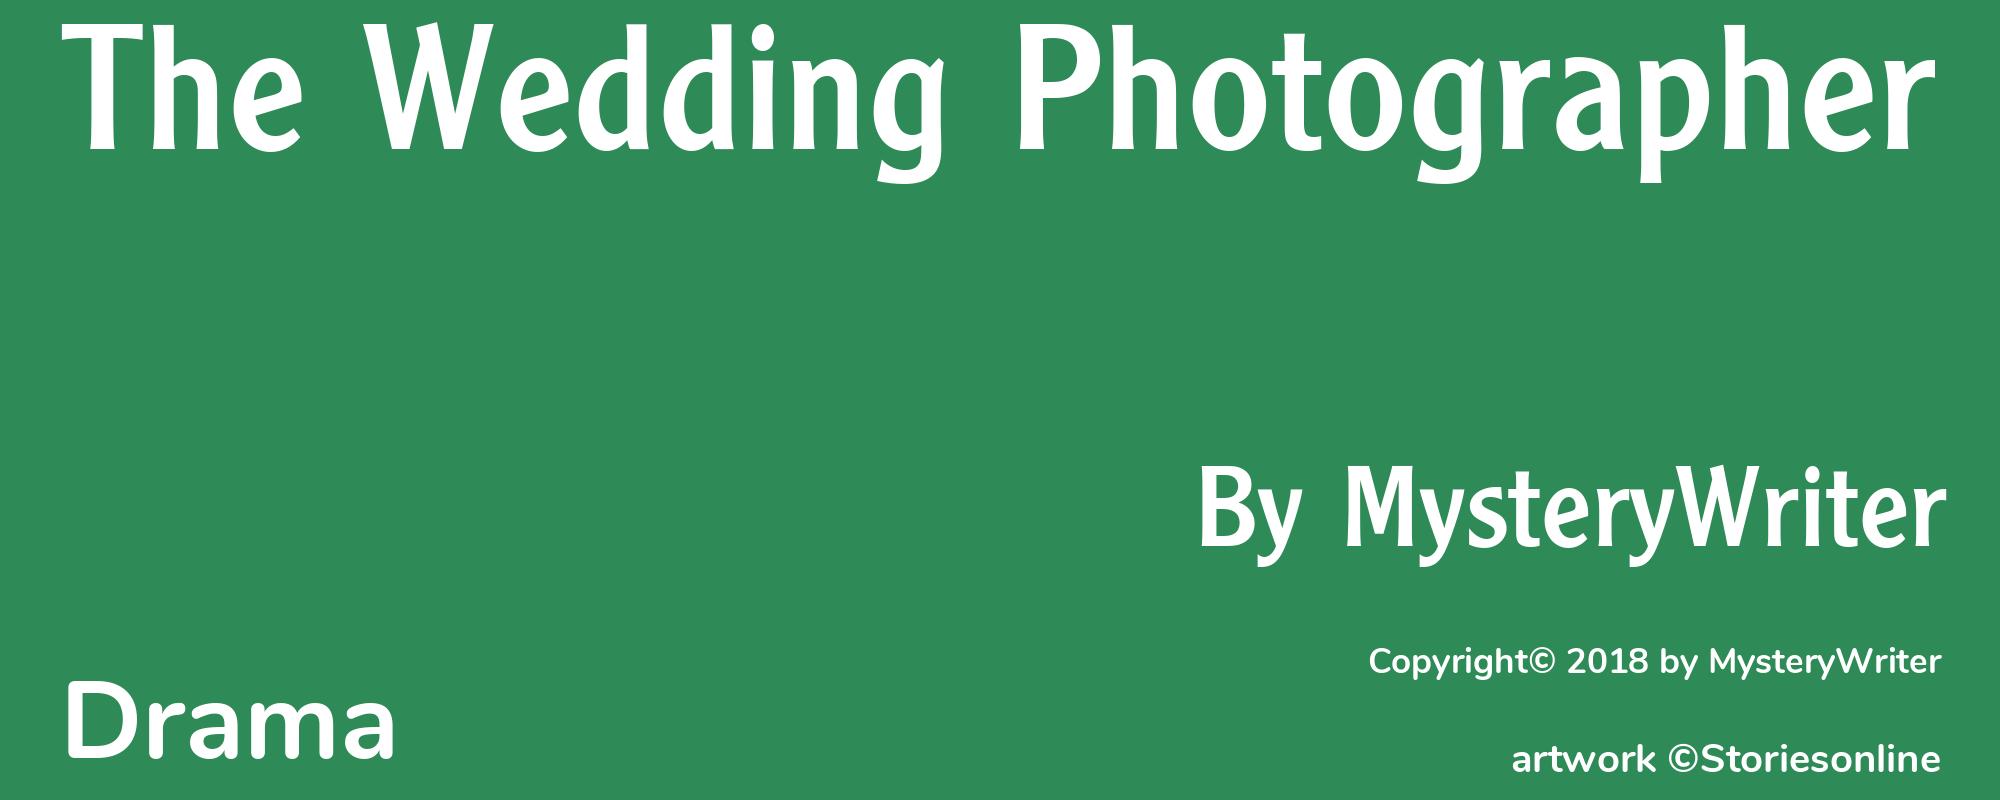 The Wedding Photographer - Cover